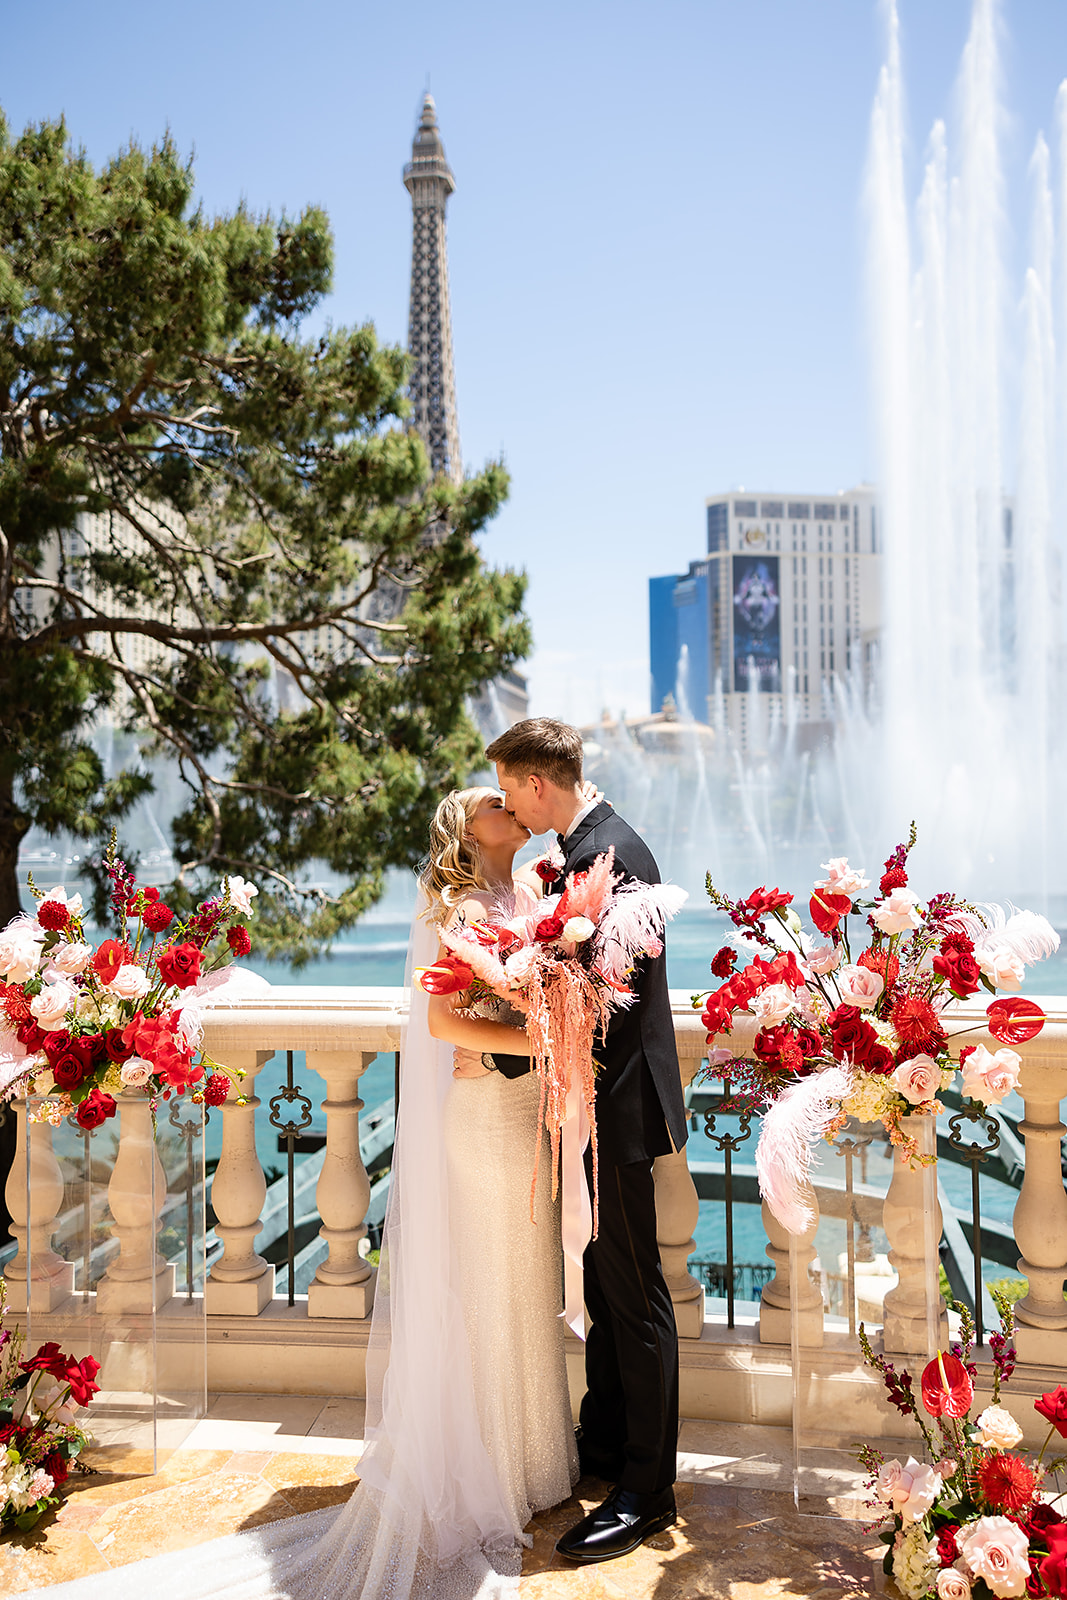 Newlywed couple sharing a kiss in front of fountain during their wedding shoot organized by Elopement Las Vegas